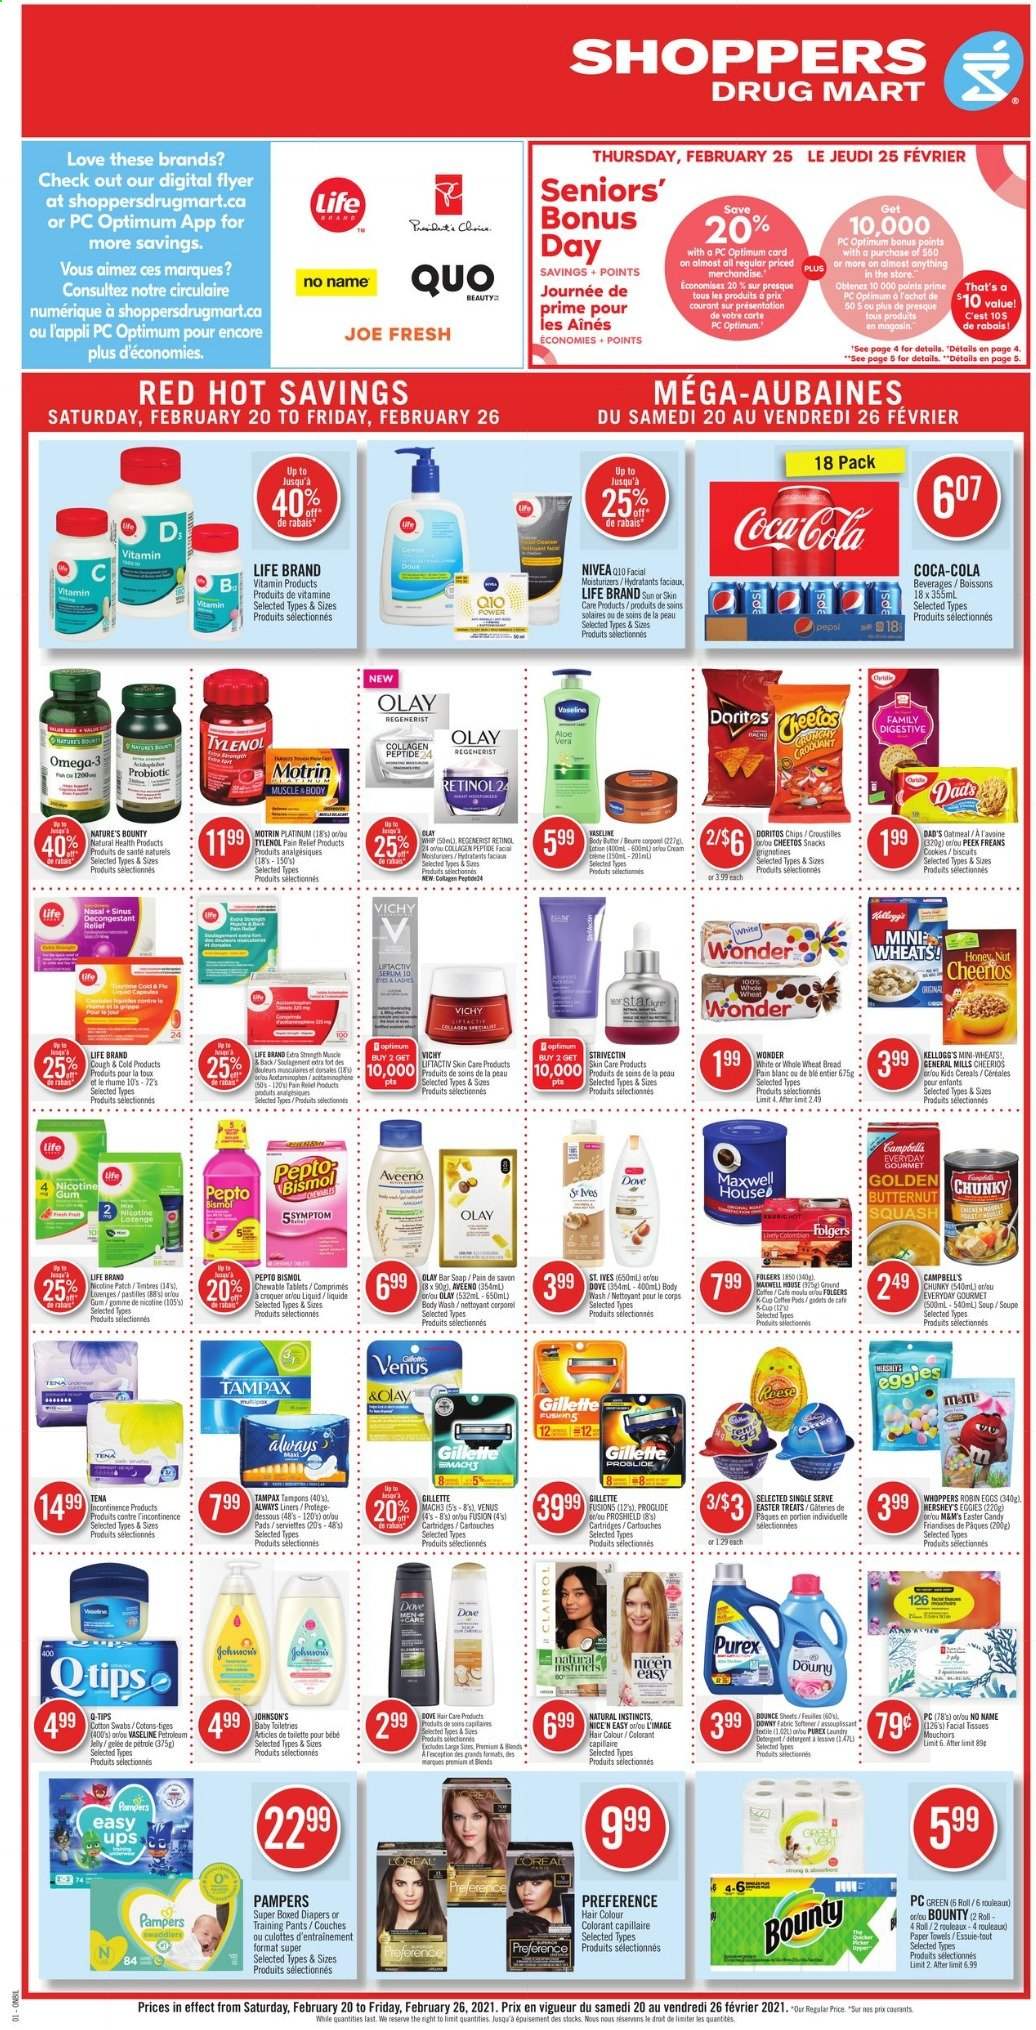 thumbnail - Shoppers Drug Mart Flyer - February 20, 2021 - February 26, 2021 - Sales products - snack, jelly, Kellogg's, Hershey's, pastilles, Doritos, Cheetos, oatmeal, soup, cereals, Cheerios, Campbell's, Coca-Cola, Folgers, pants, nappies, Johnson's, baby pants, Aveeno, tissues, Always liners, kitchen towels, paper towels, fabric softener, laundry detergent, Bounce, Purex, Downy Laundry, body wash, Vichy, Vaseline, soap bar, soap, tampons, facial tissues, serum, Olay, hair color, body butter, Venus, pain relief, Nature's Bounty, Tylenol, Omega-3, Motrin, Gillette, Tampax, Pampers, Nivea, chips, M&M's. Page 1.